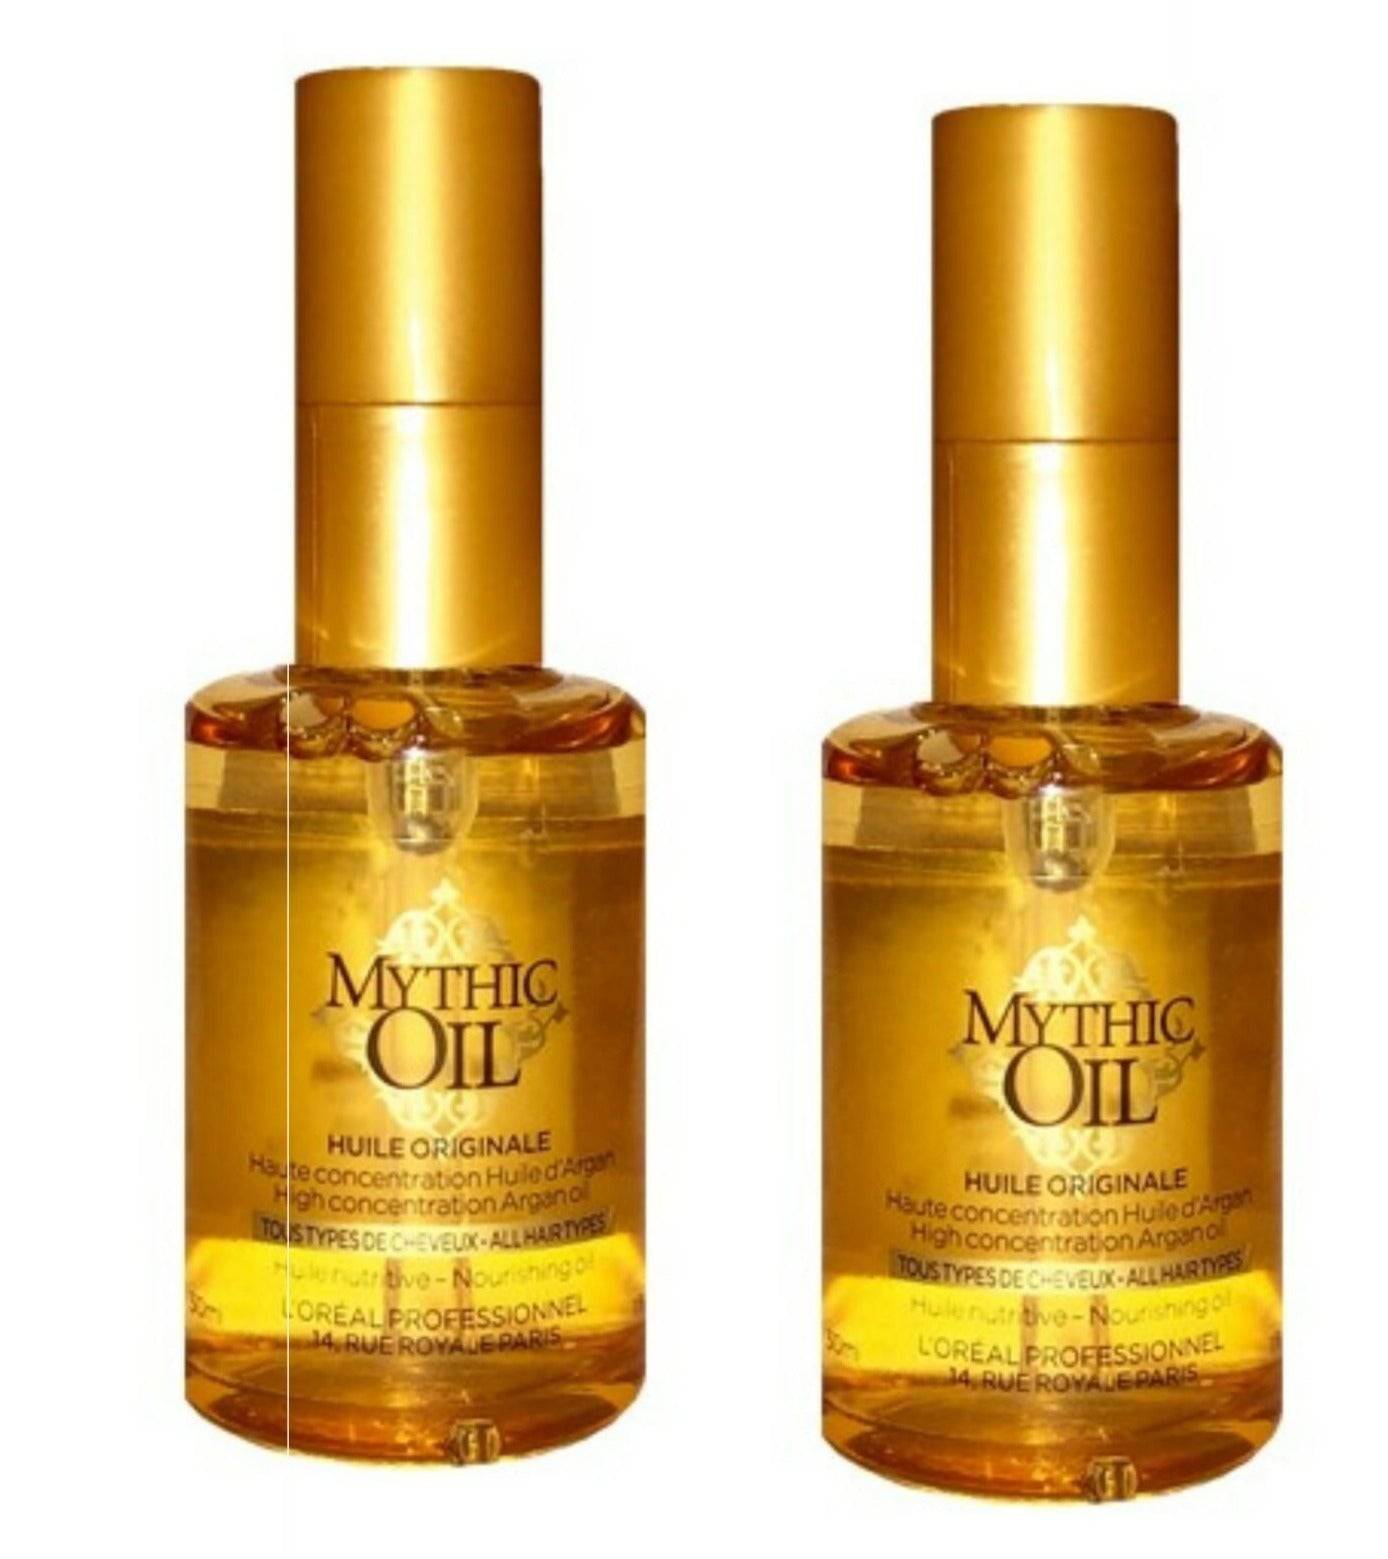 L'Oreal Mythic Oil Nourishing Hule Originale For All Hair Types 30ml x 2 - On Line Hair Depot